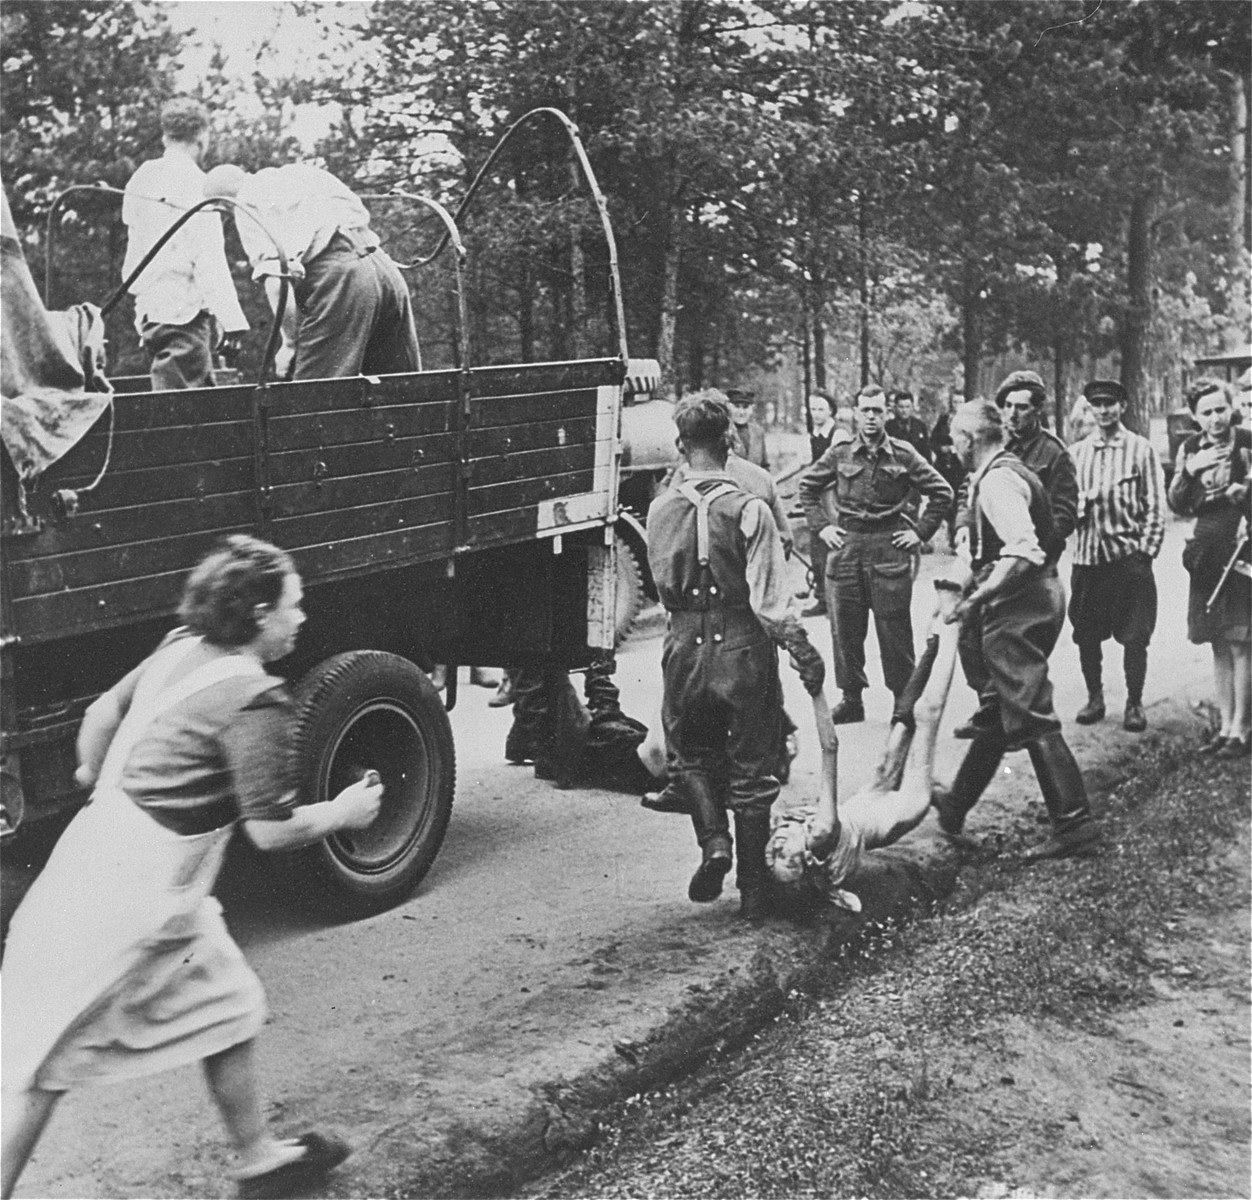 Under British guard, former SS guards in Bergen-Belsen are forced to load the corpses of prisoners onto trucks, for transport to mass graves.

Running after the truck is Clara Spiegler (later Silbernik), who became furious after seeing SS throw the corpse of her best friend onto the truck.